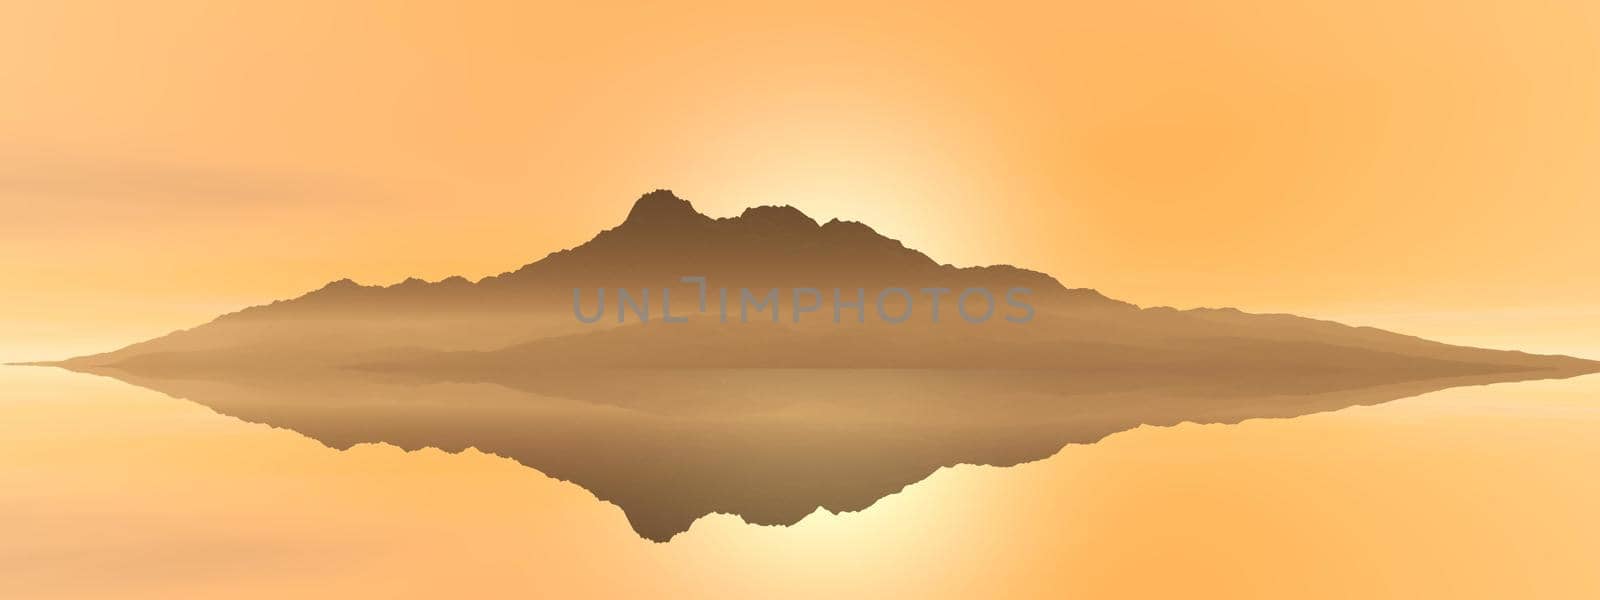 beautiful view of a mountain mirrored on a lake - 3d rendering by mariephotos